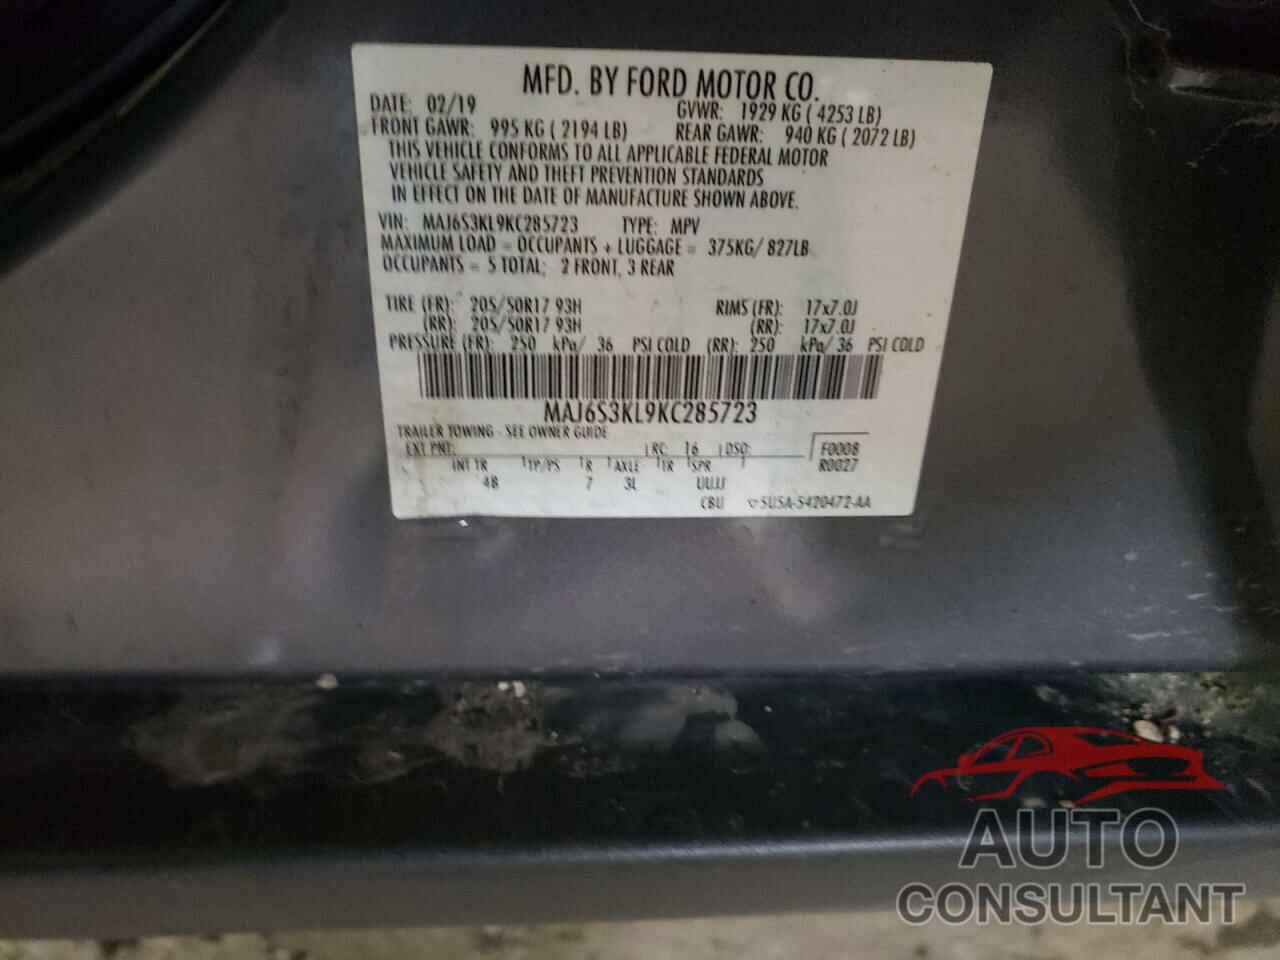 FORD ALL OTHER 2019 - MAJ6S3KL9KC285723